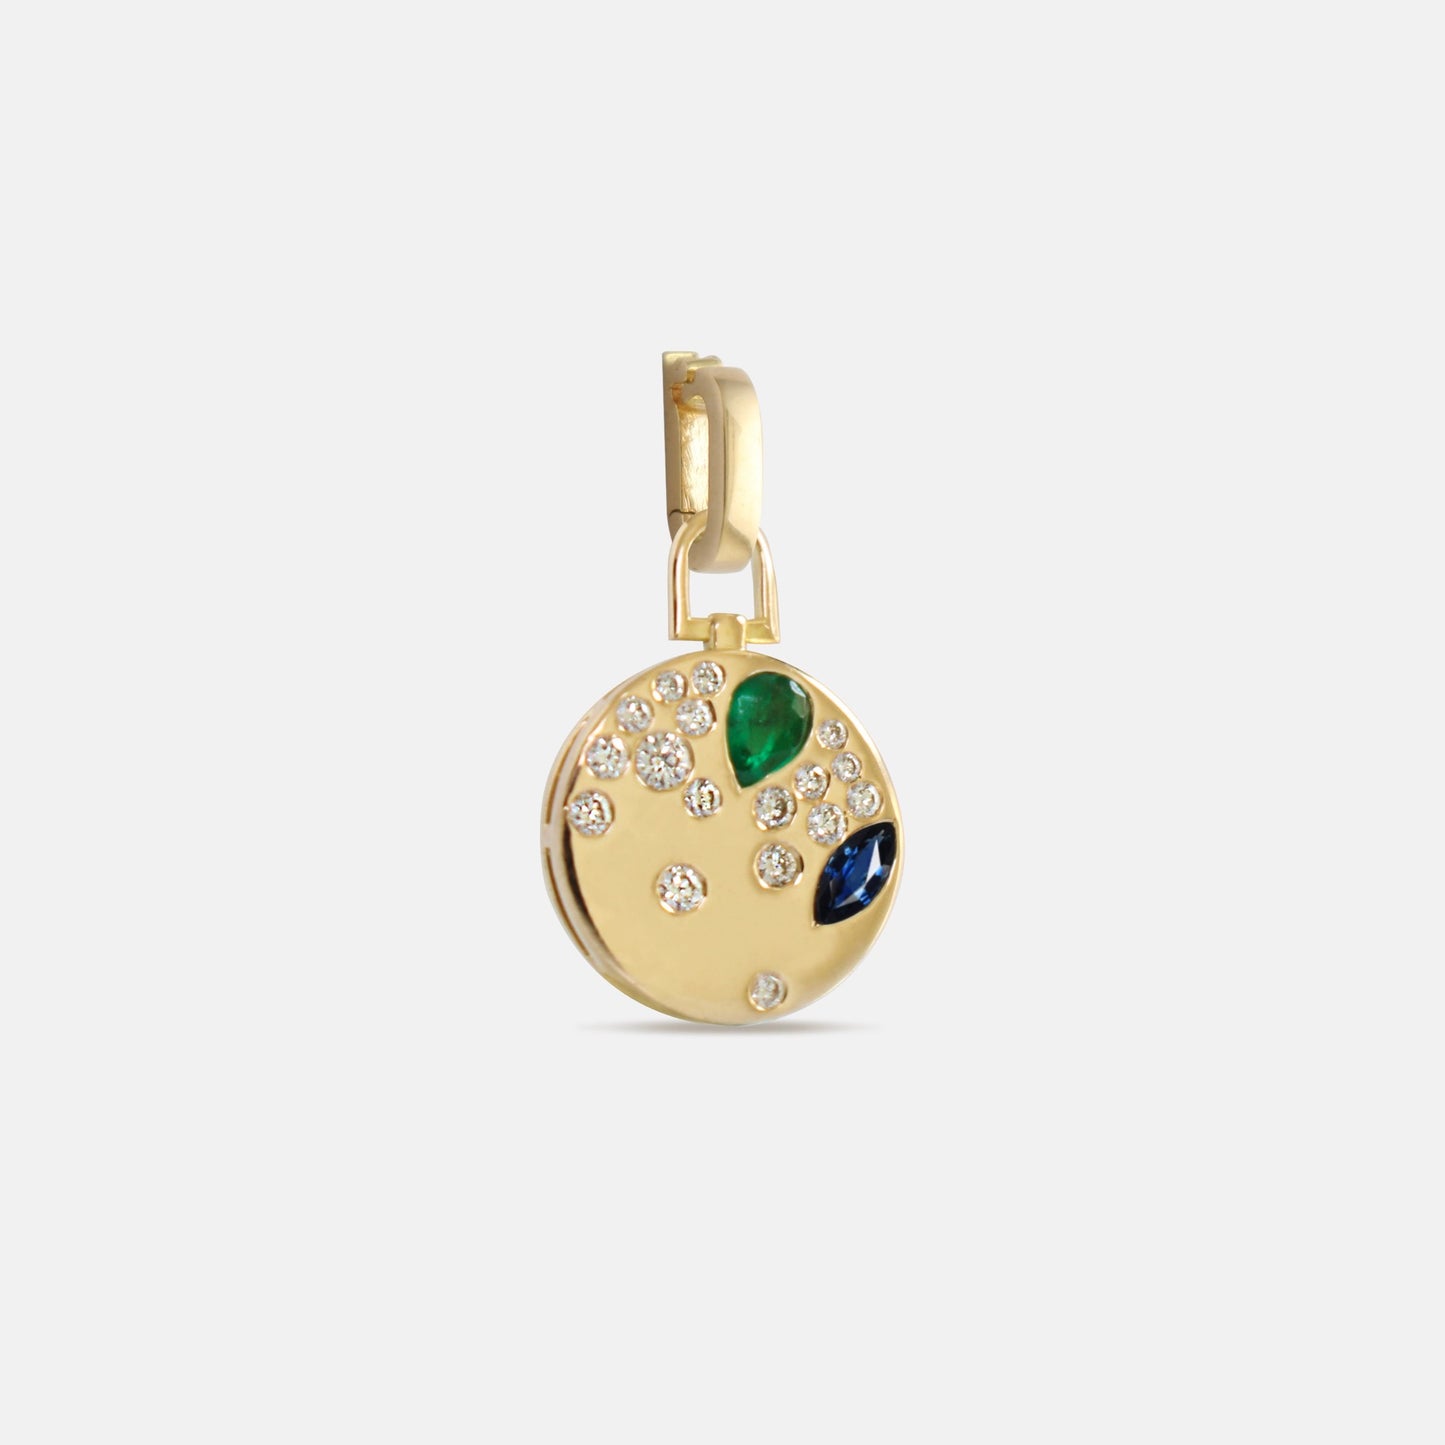 Mercury Charm in Gold, Diamonds, Sapphires and Emeralds